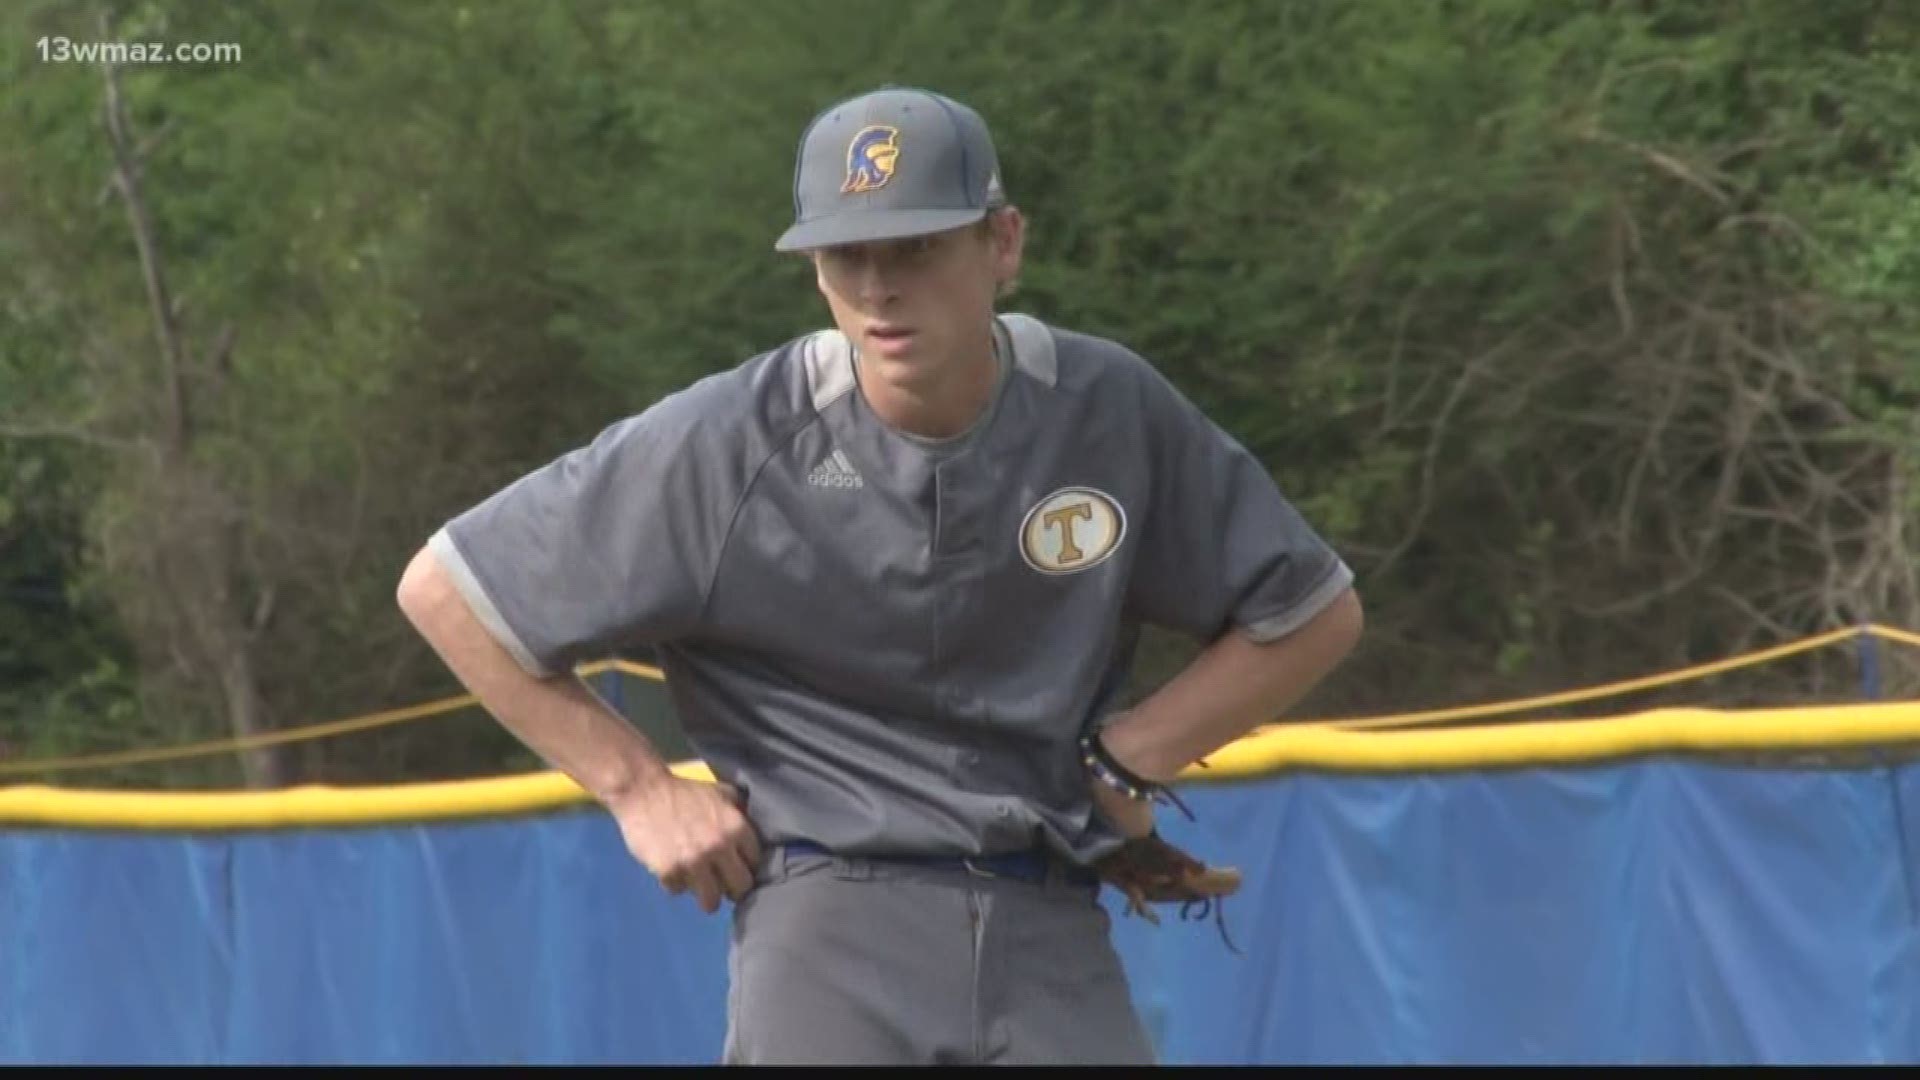 Time to shine the spotlight on a student athlete getting it done on the baseball diamond and the classroom. Tattnall's Bo Hatcher is our Athlete of the Week.